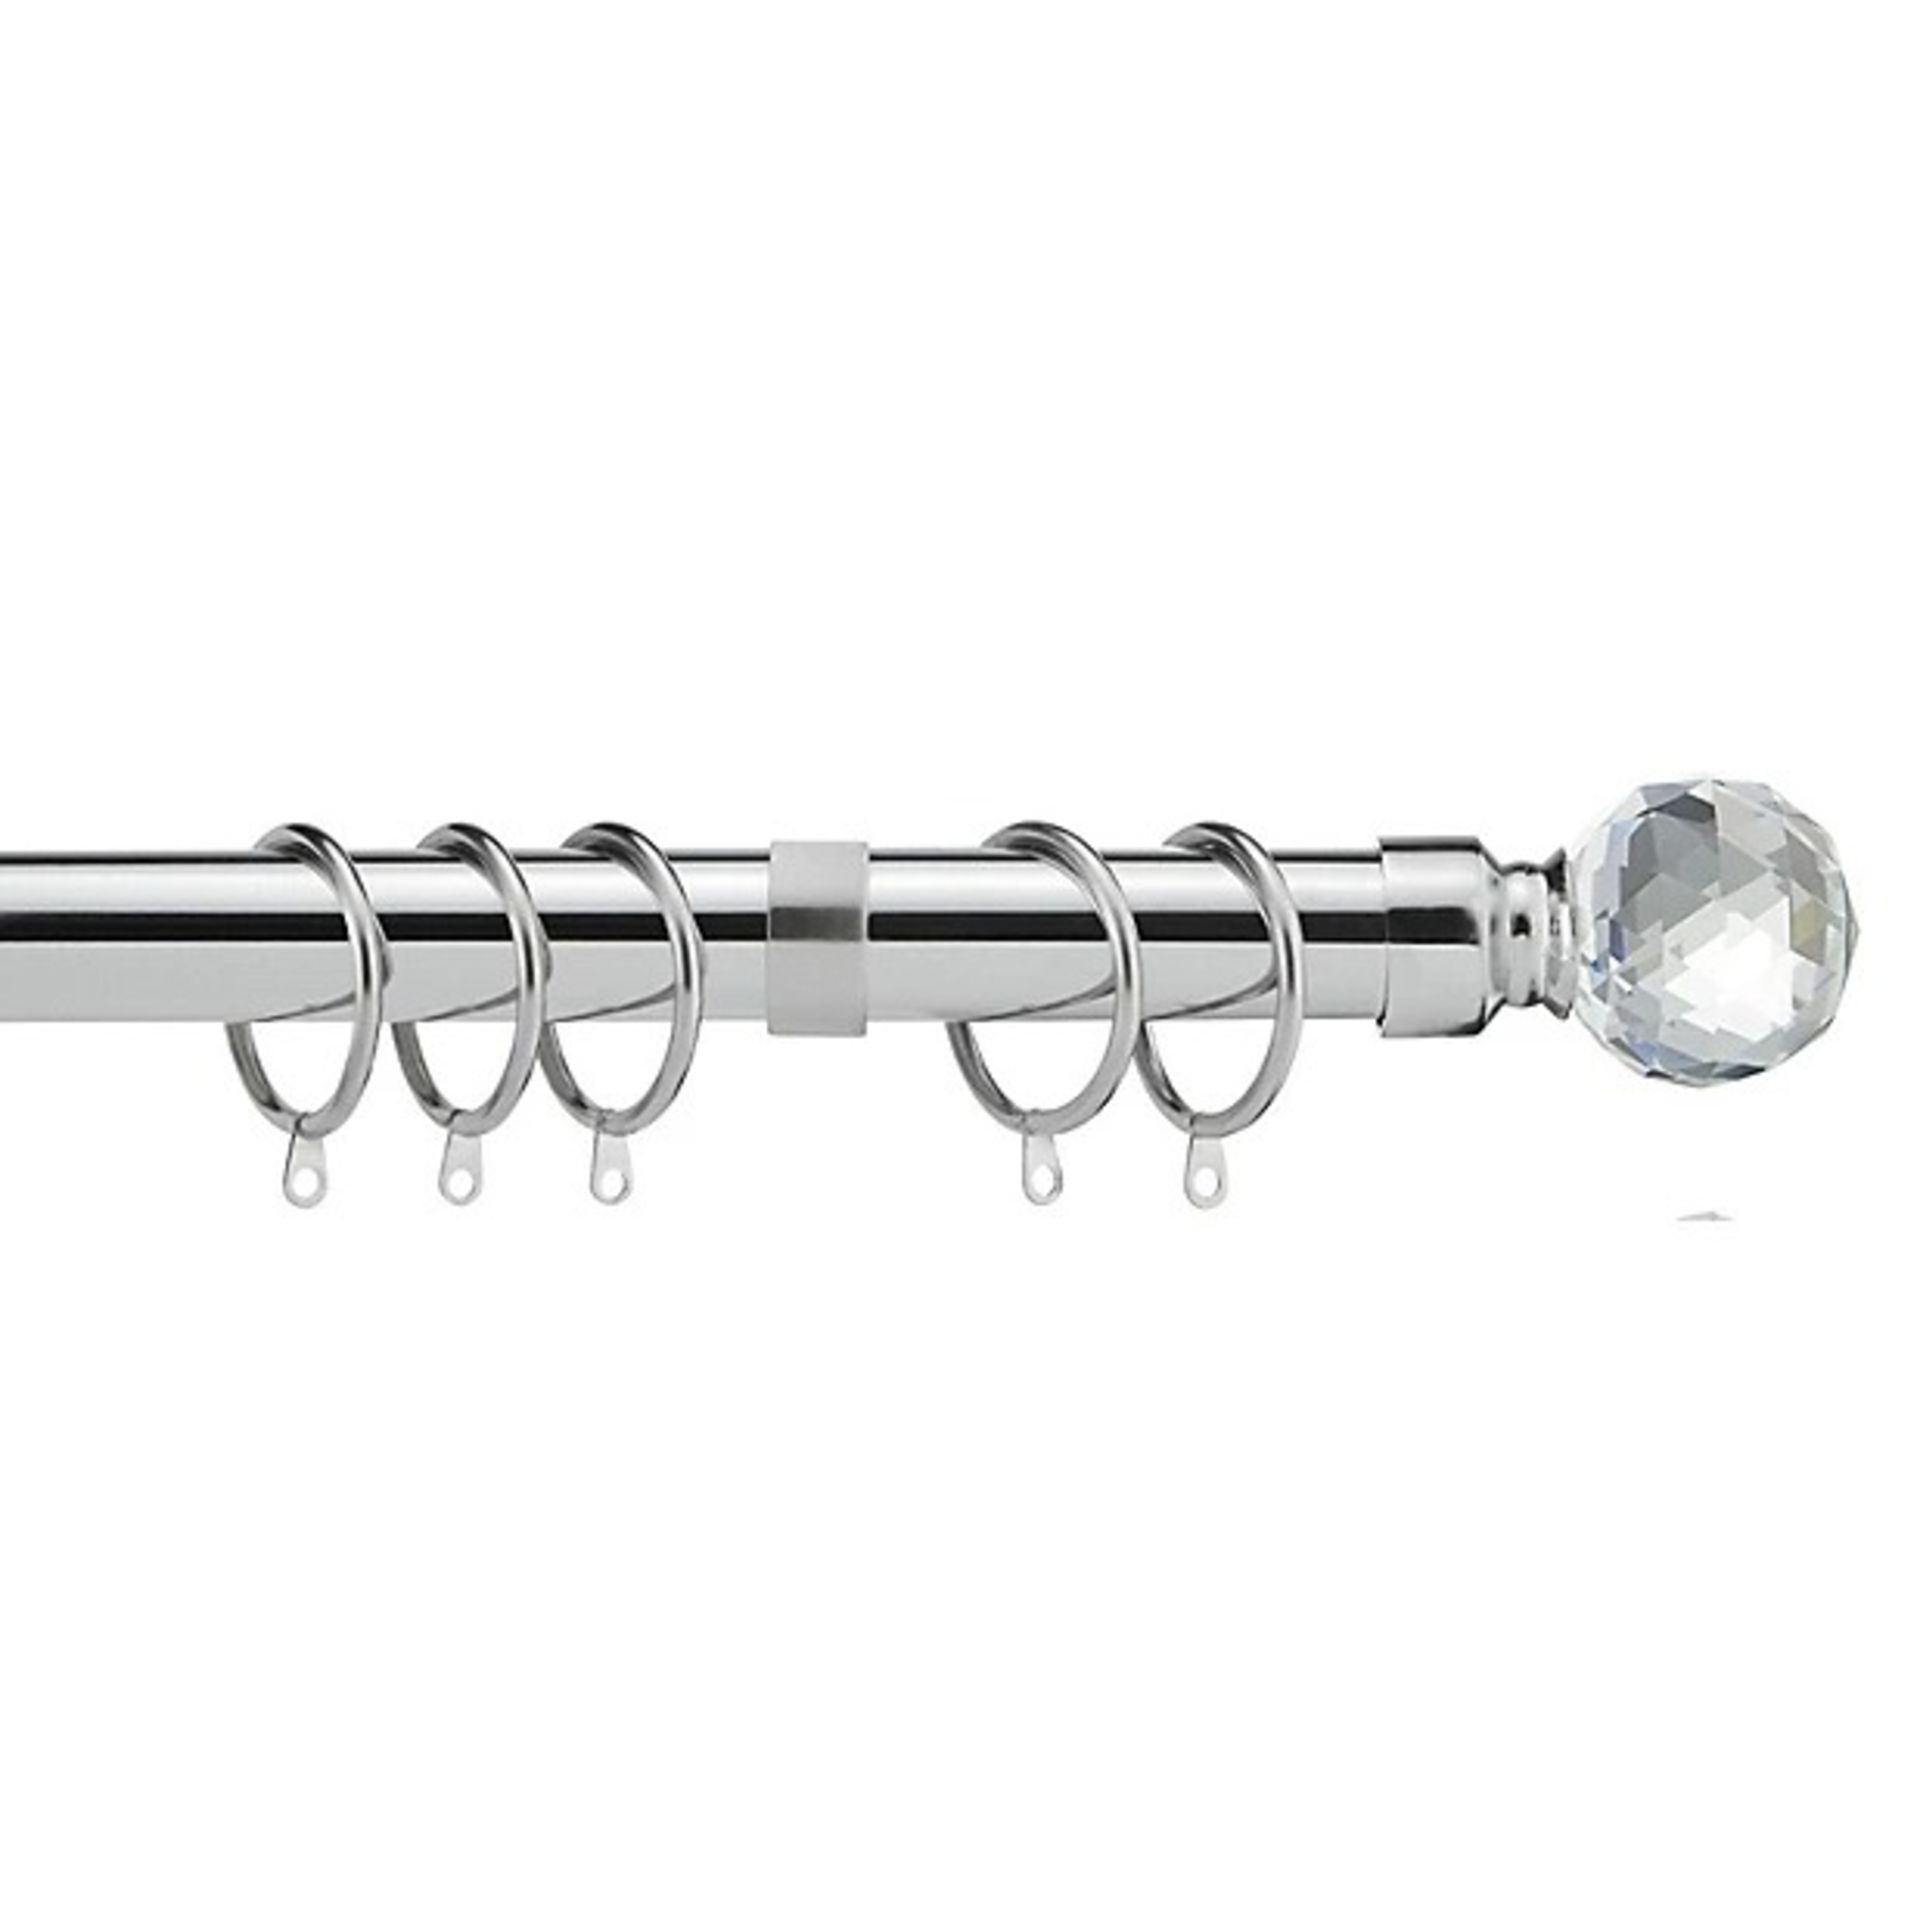 28mm Crystal End Metal Curtain Pole Set 210-300cm Chrome with Rings - ER47